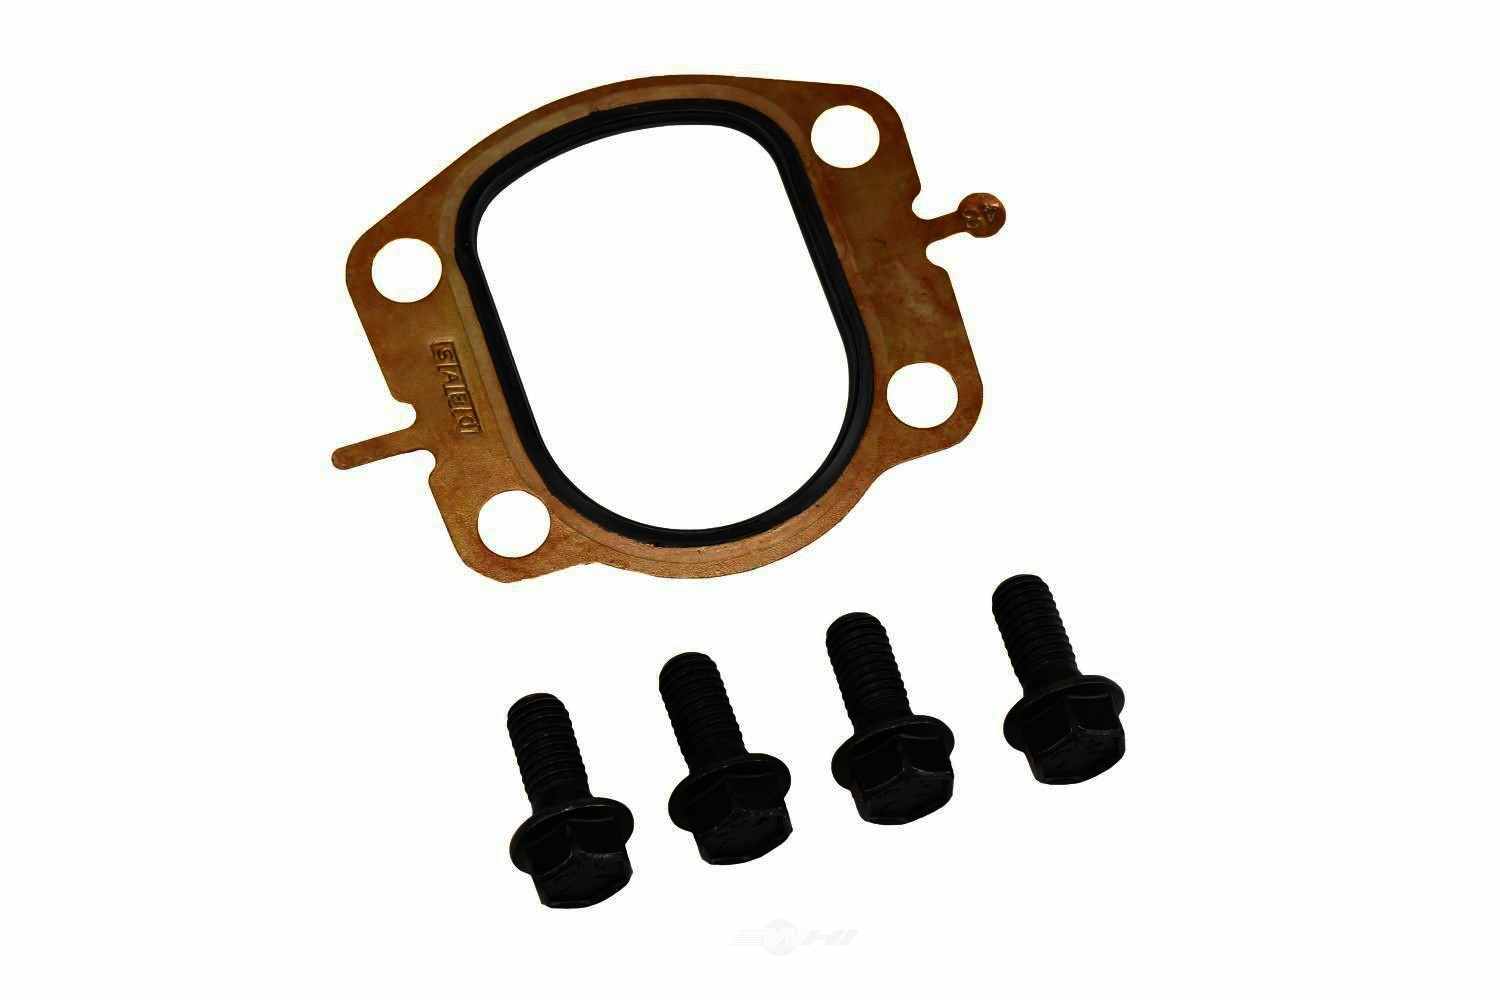 GM GENUINE PARTS - Steering Gear Housing Seal - GMP 07817486